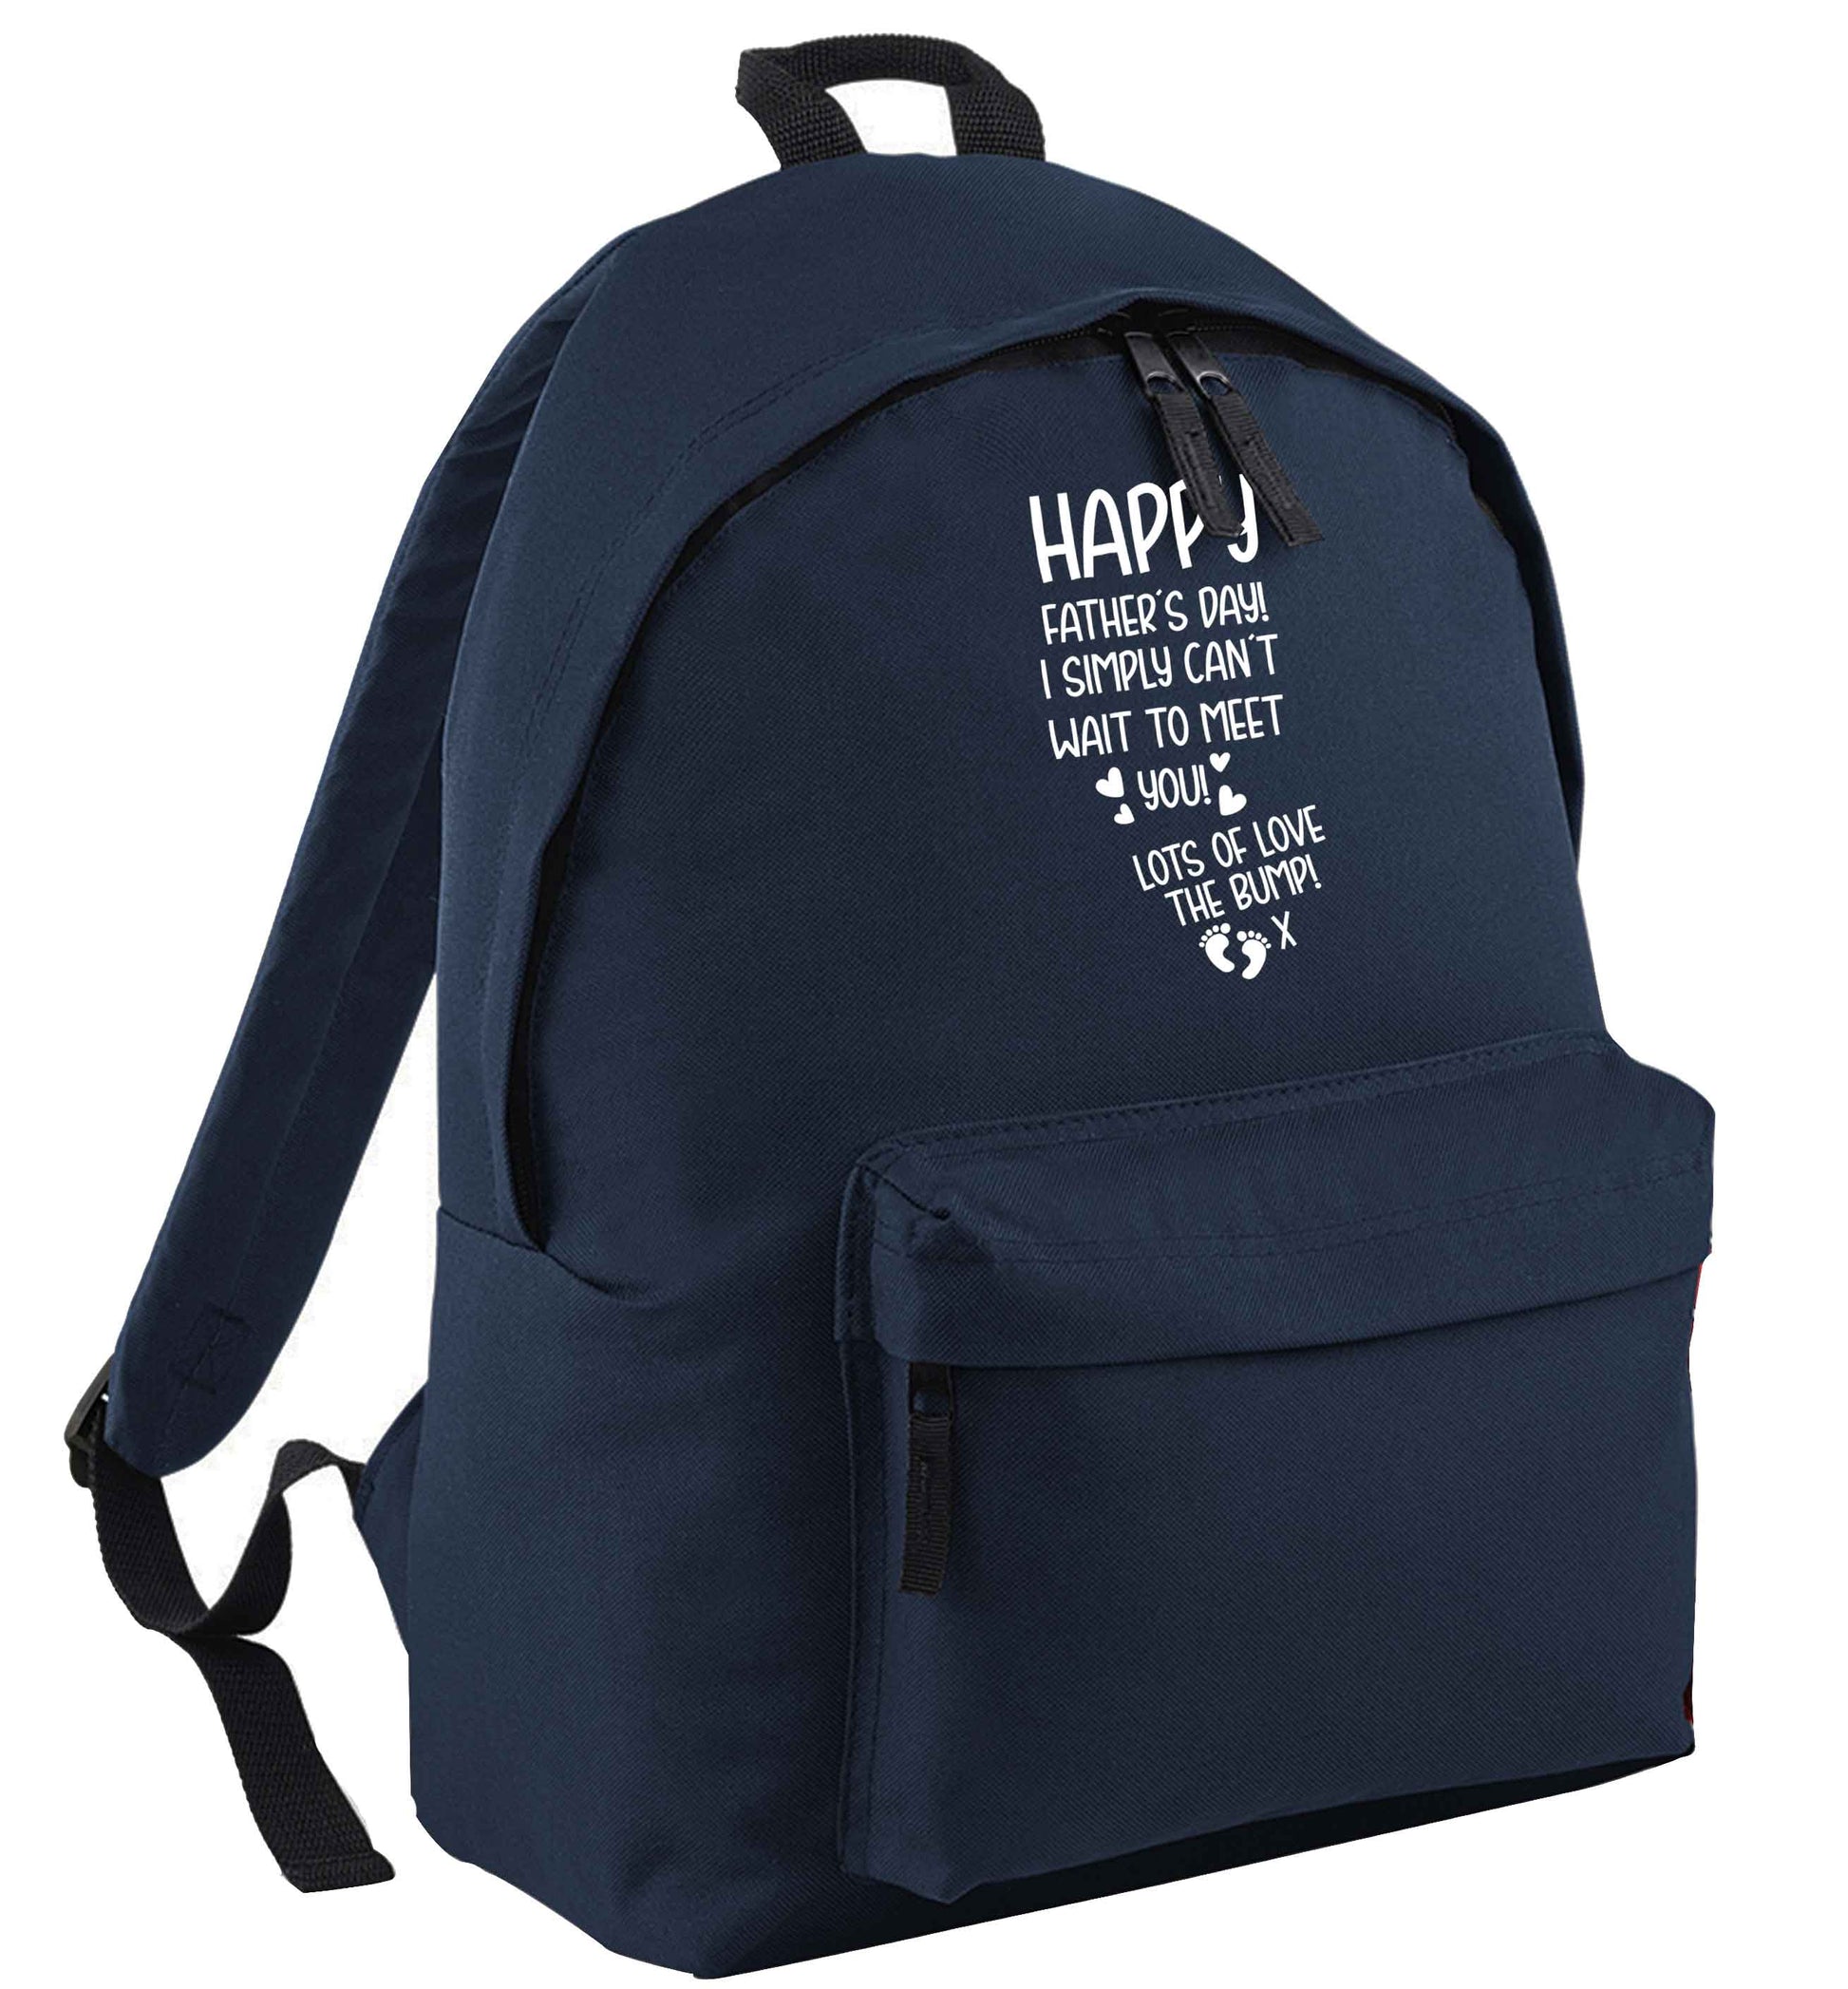 Happy Father's day daddy I can't wait to meet you lot's of love the bump! navy adults backpack